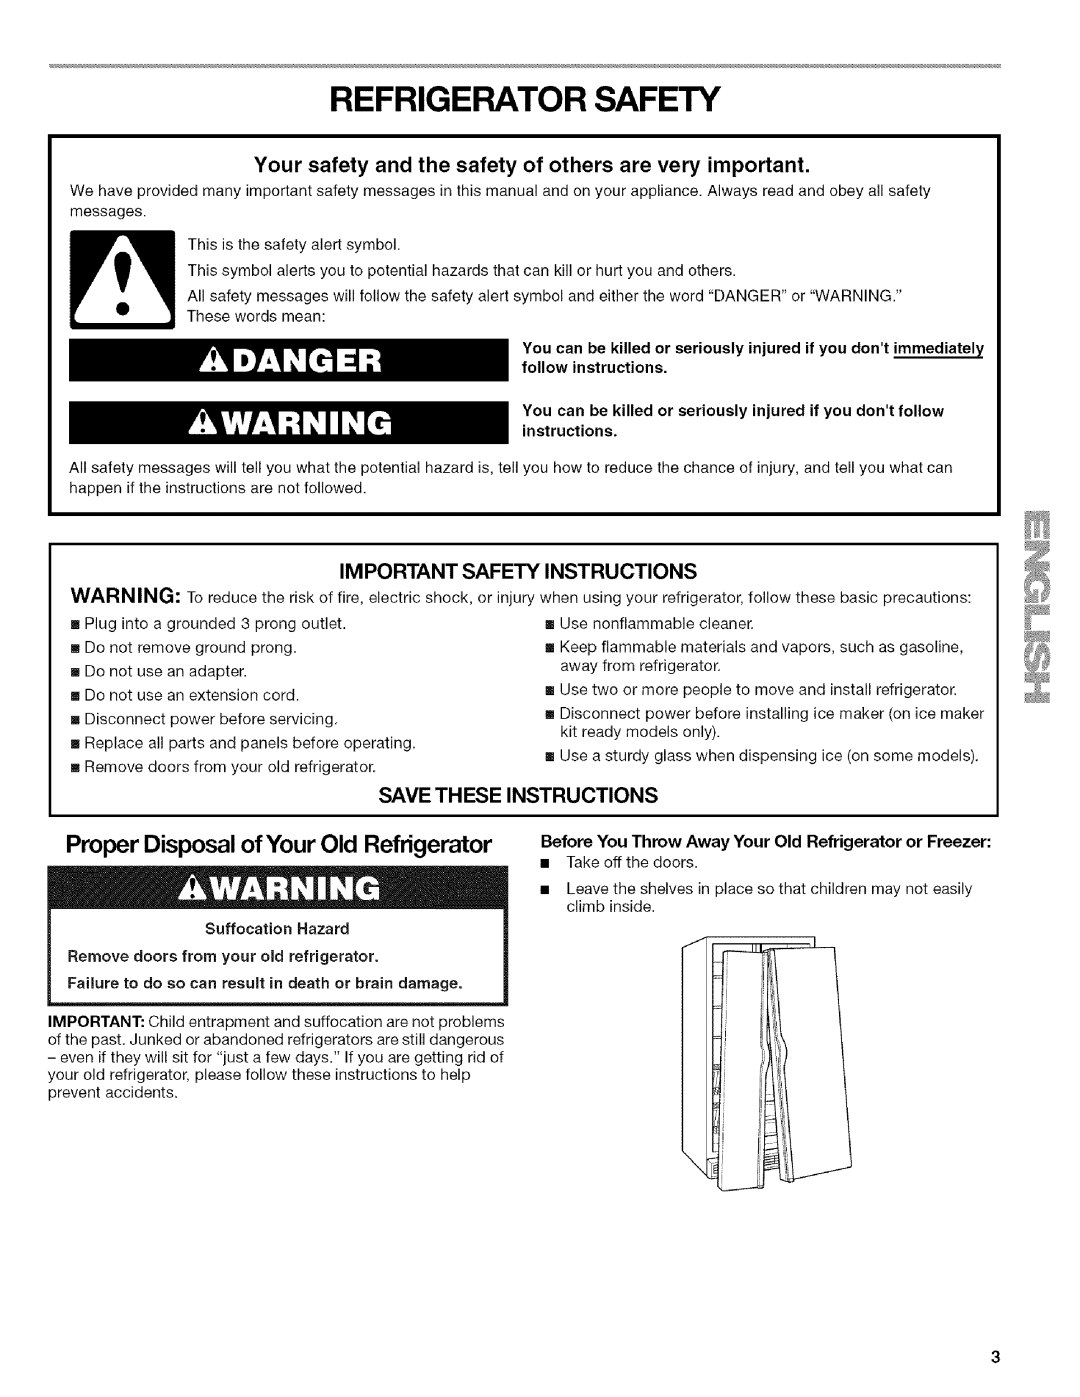 Kenmore 2318589 manual Refrigerator Safety, Proper Disposal of Your Old Refrigerator, Important Safety, Instructions 